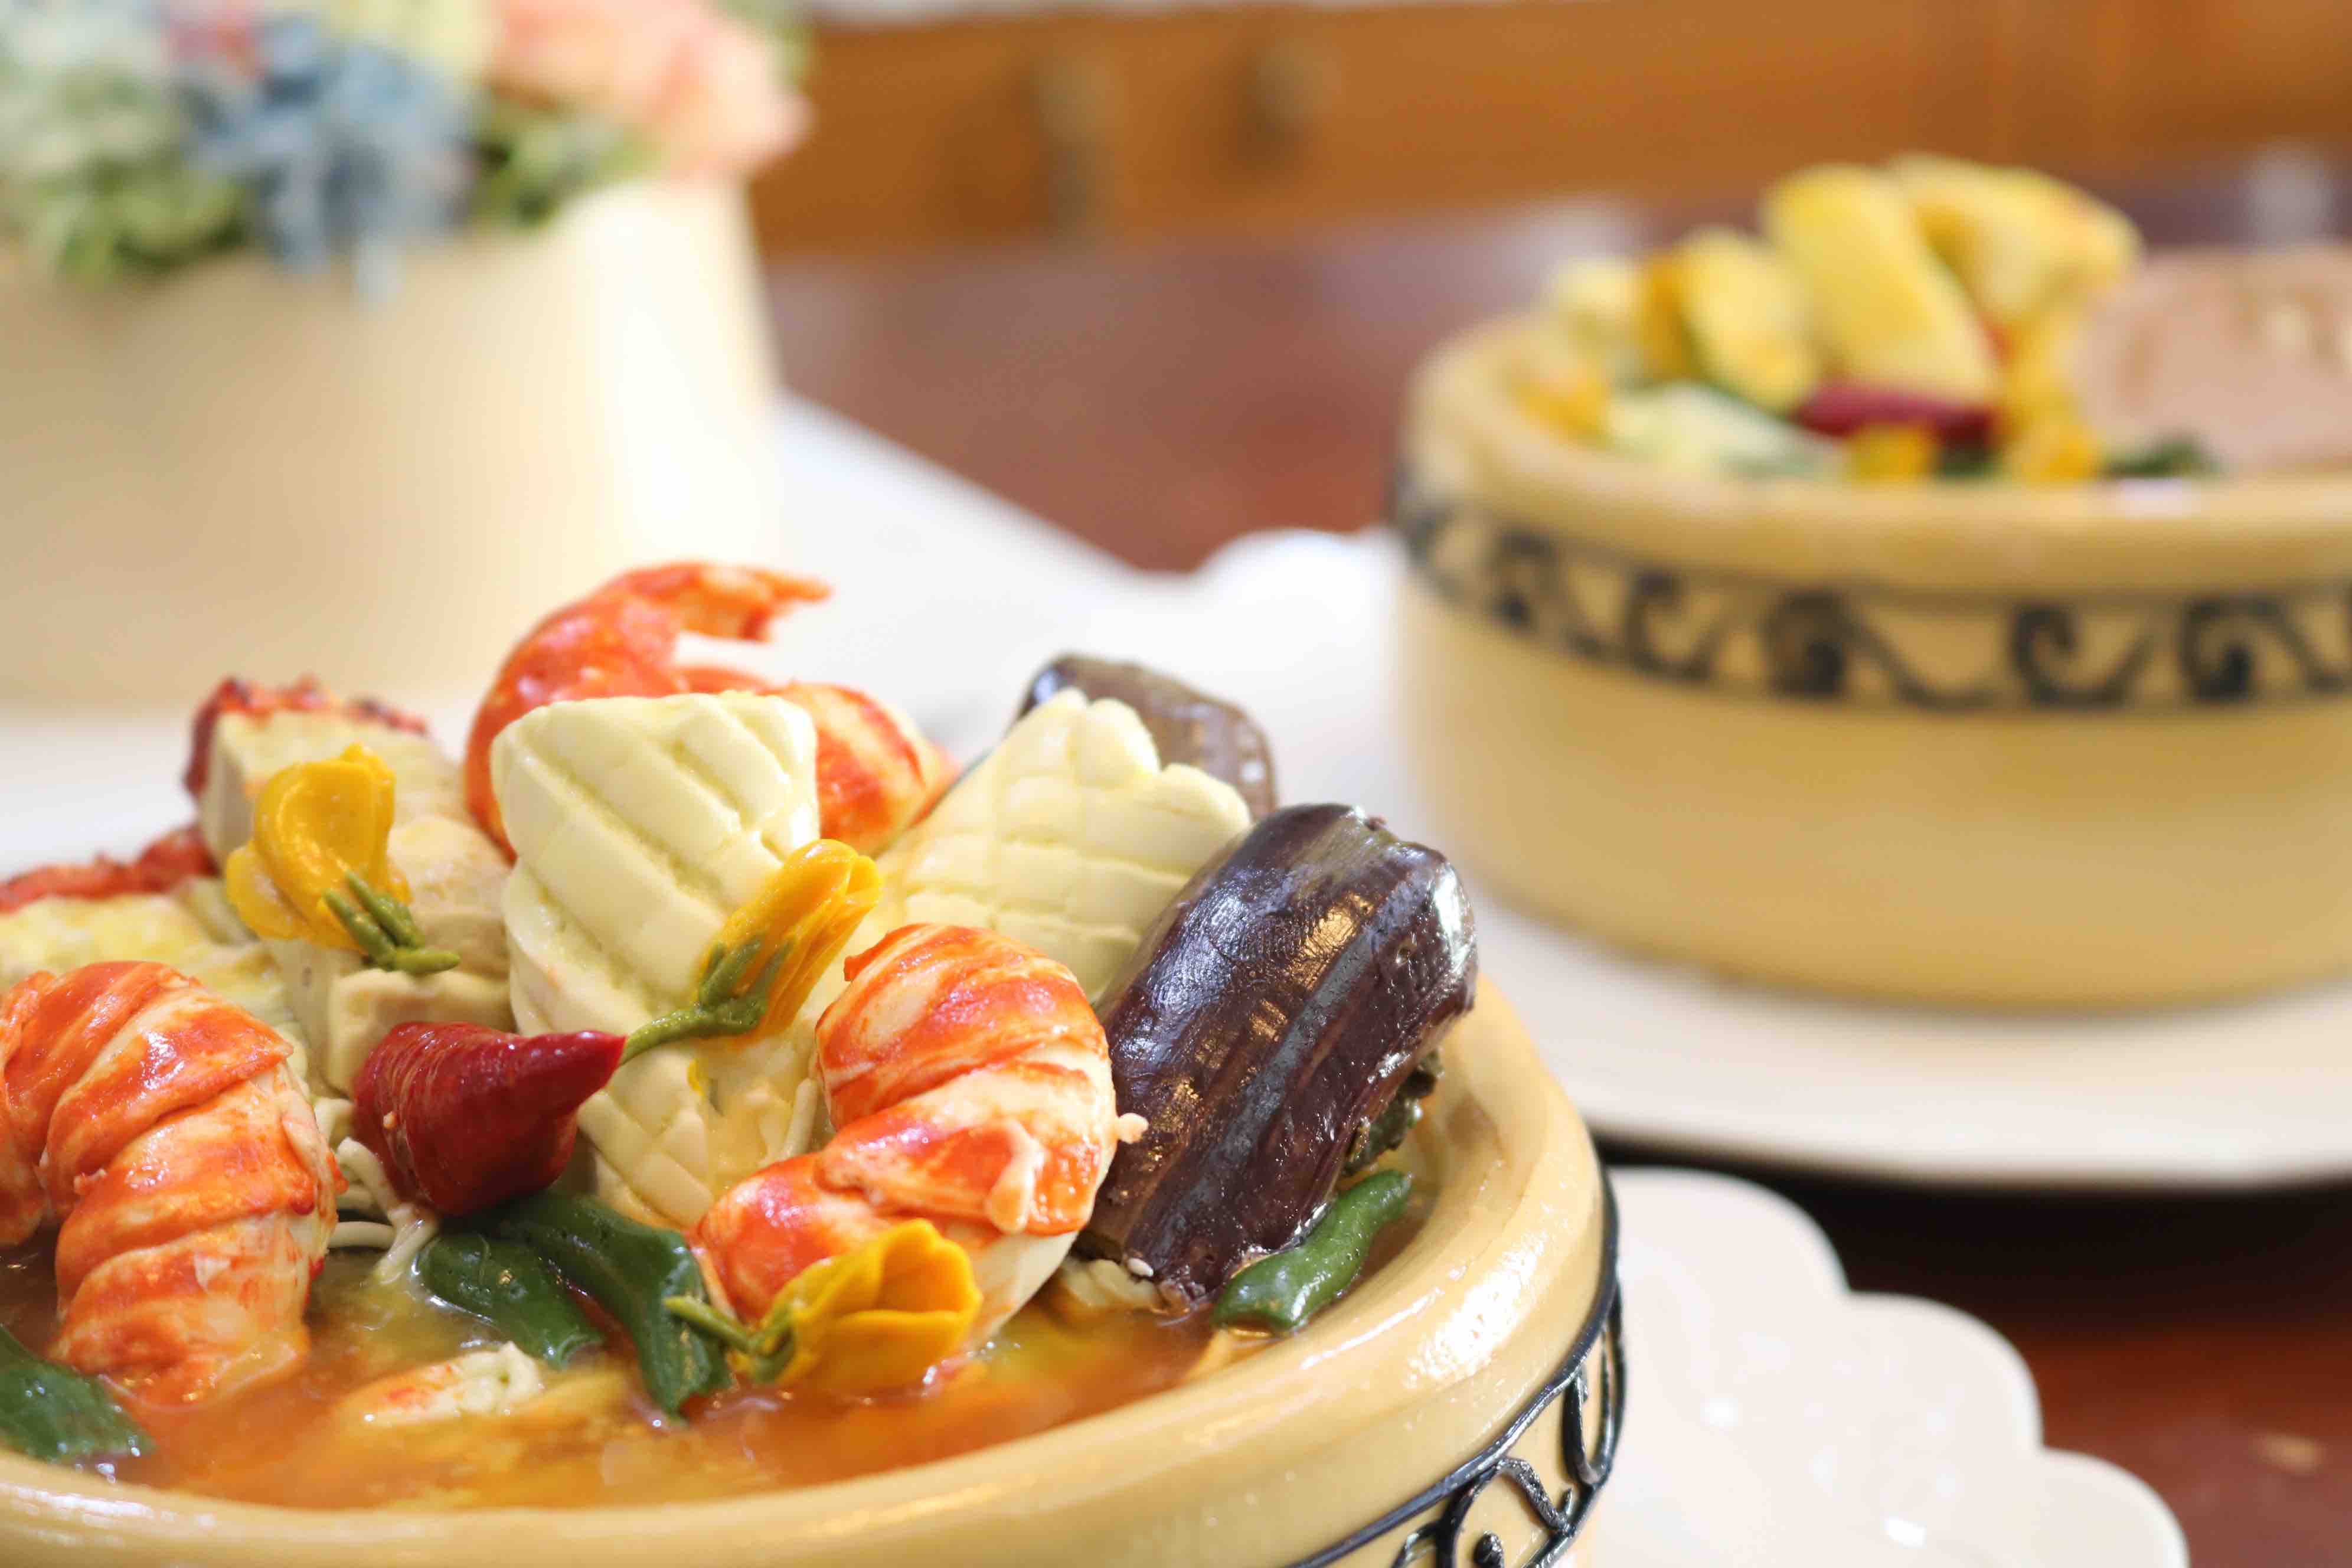 This baker makes delectable Vietnamese-inspired cakes that look no different from real objects